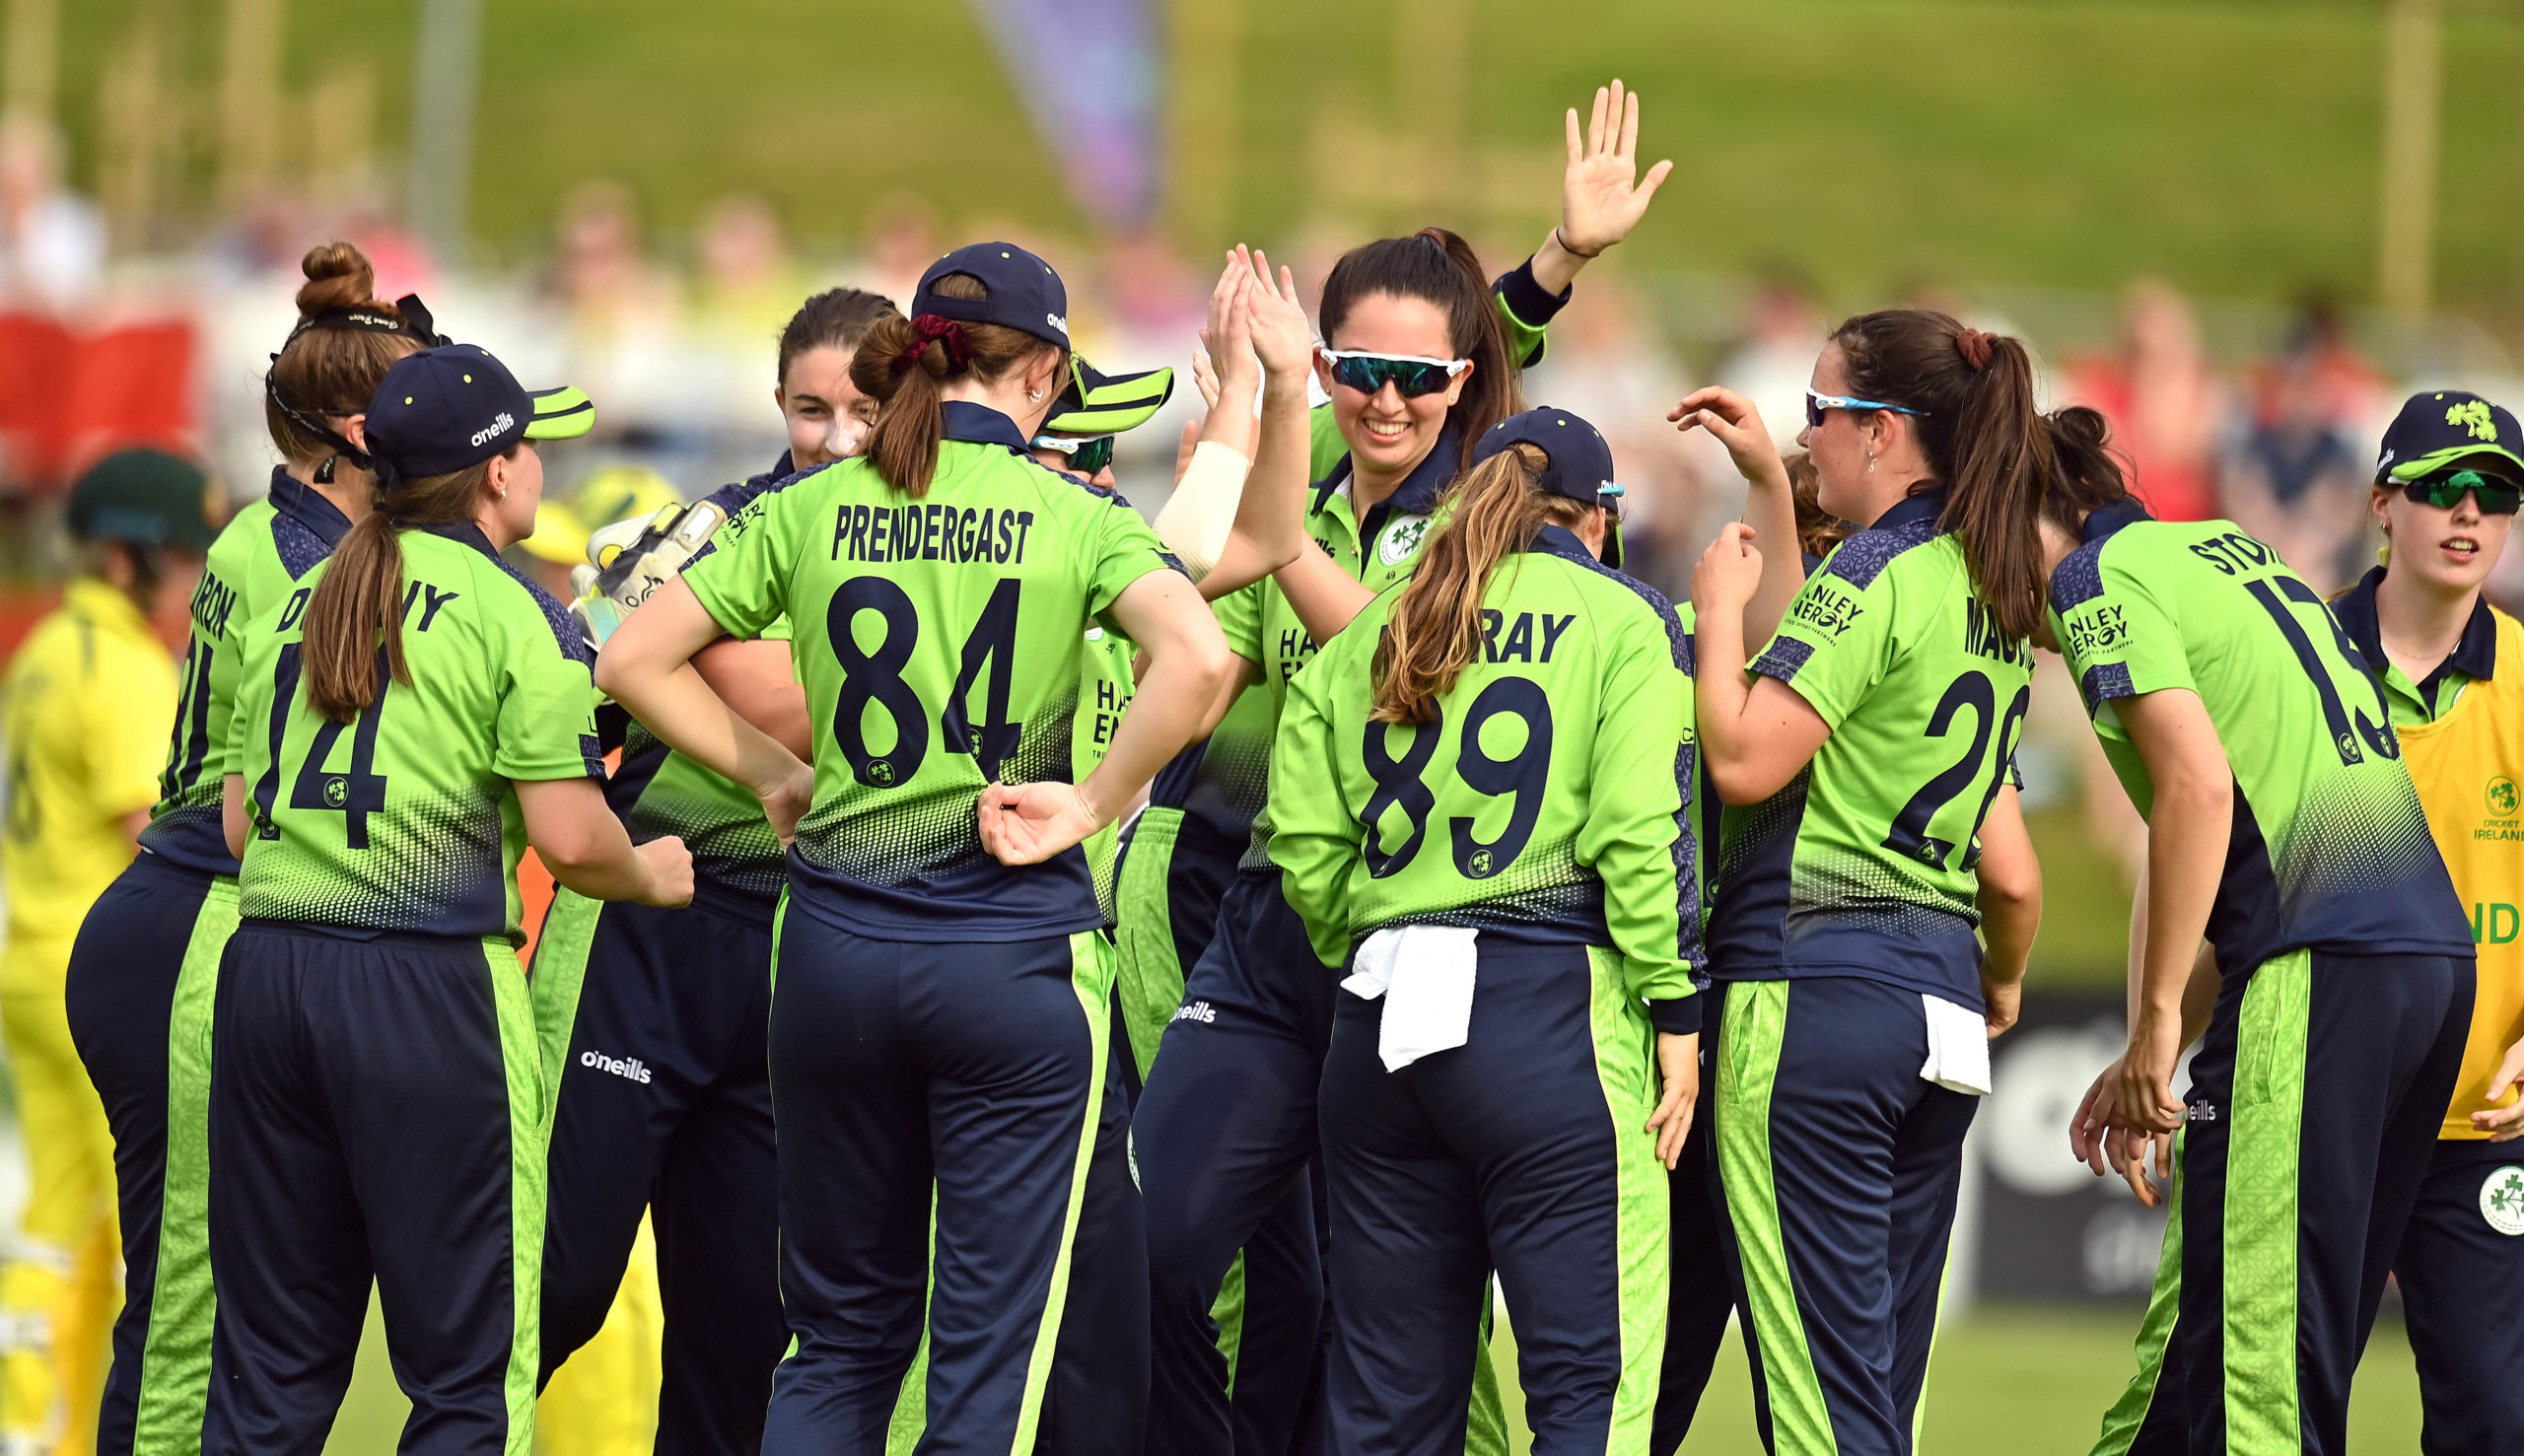 Cricket Ireland: All you need to know about the Women’s T20 World Cup Qualifier